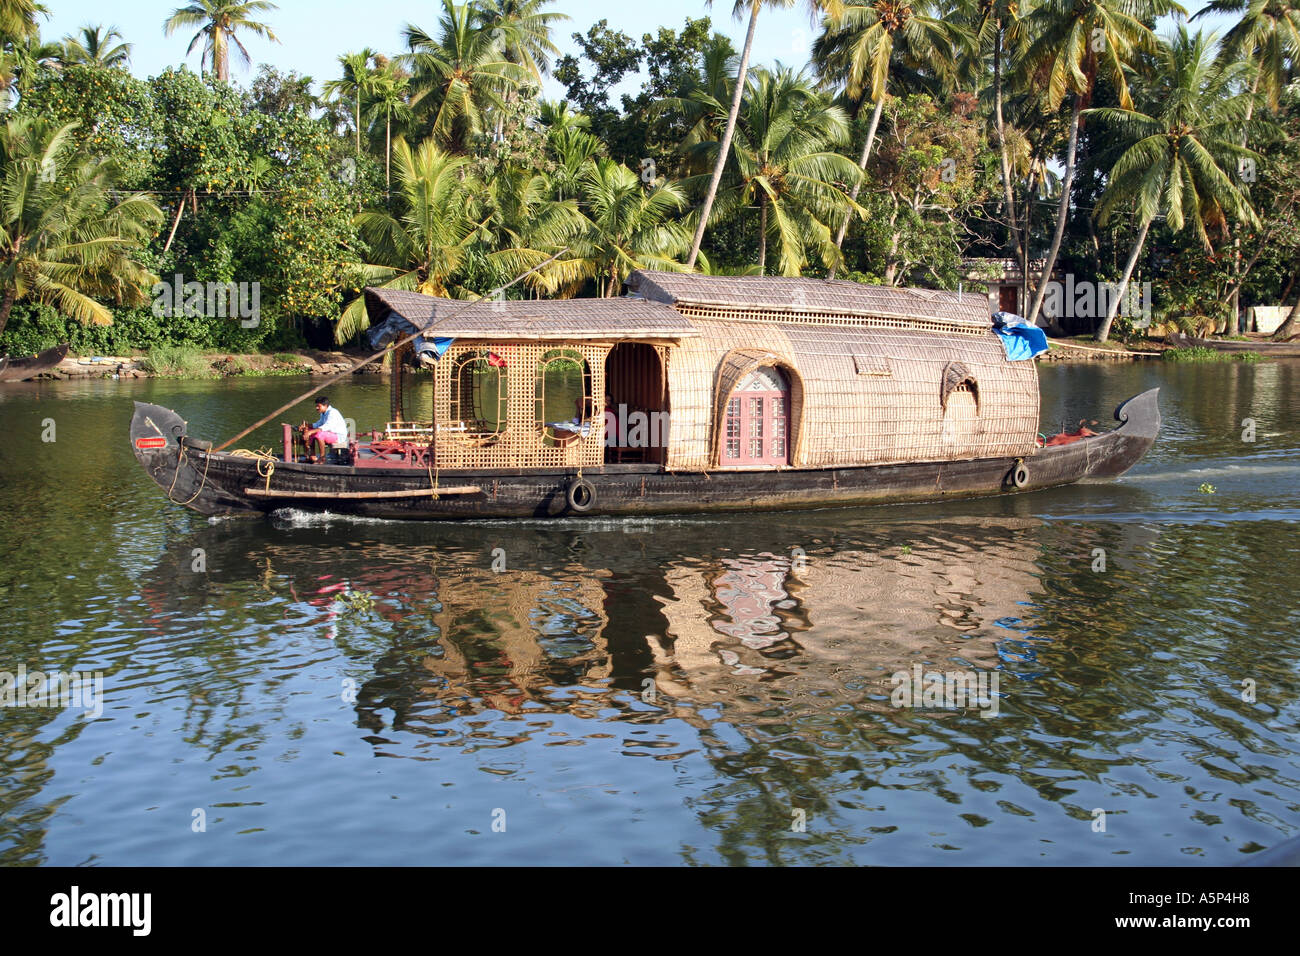 A traditional Houseboat on the backwaters of Kerala Stock Photo